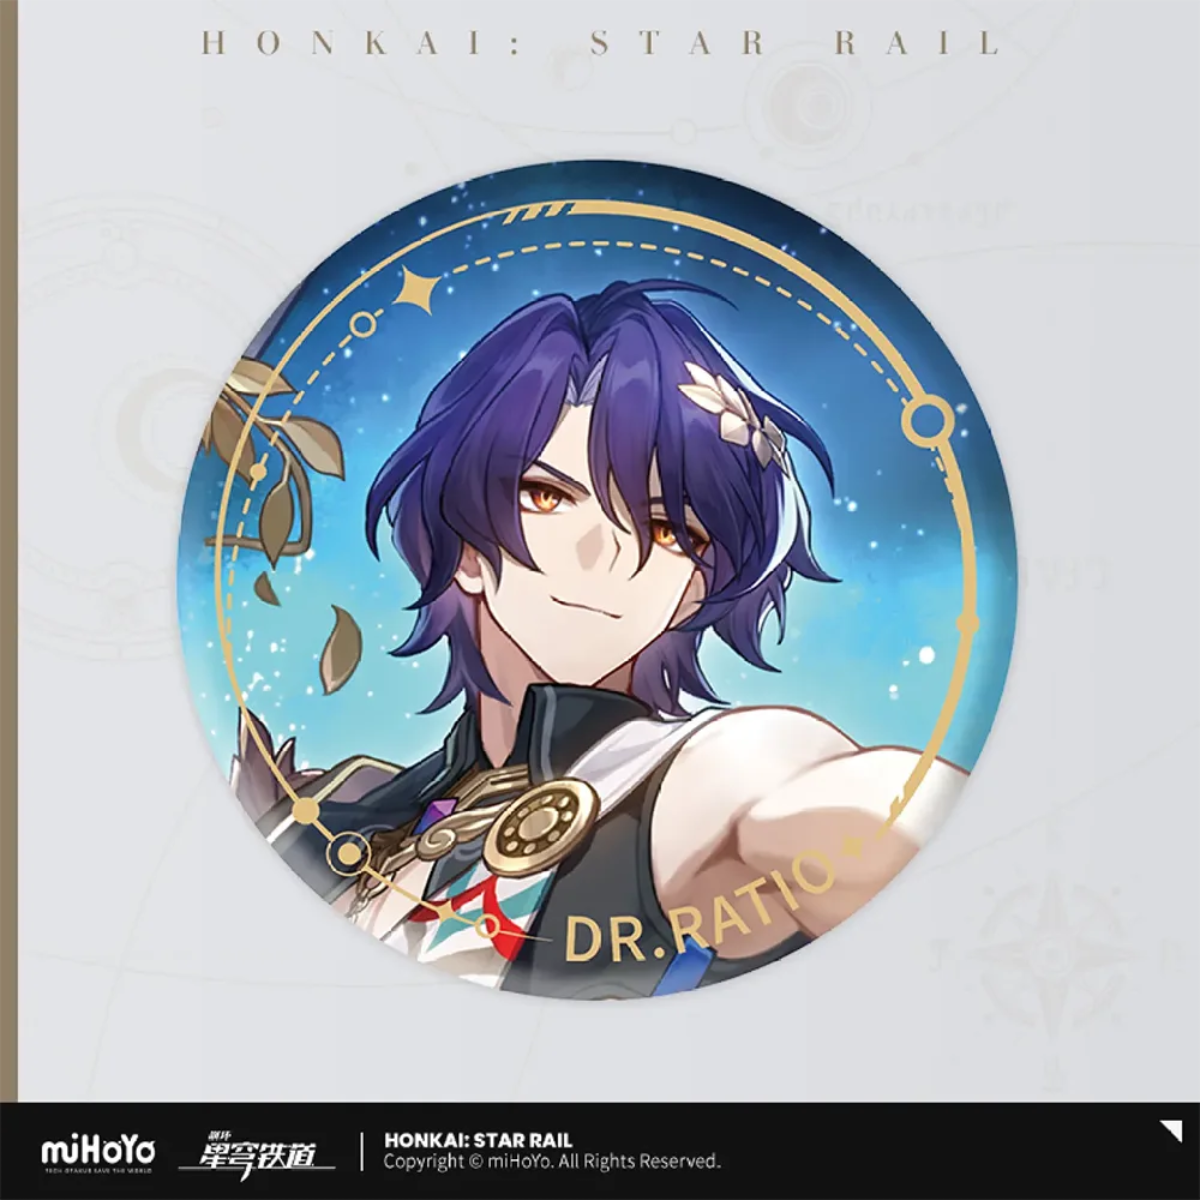 Honkai: Star Rail Character Badge &quot;The Hunt Path&quot;-Dr. Ratio-miHoYo-Ace Cards &amp; Collectibles